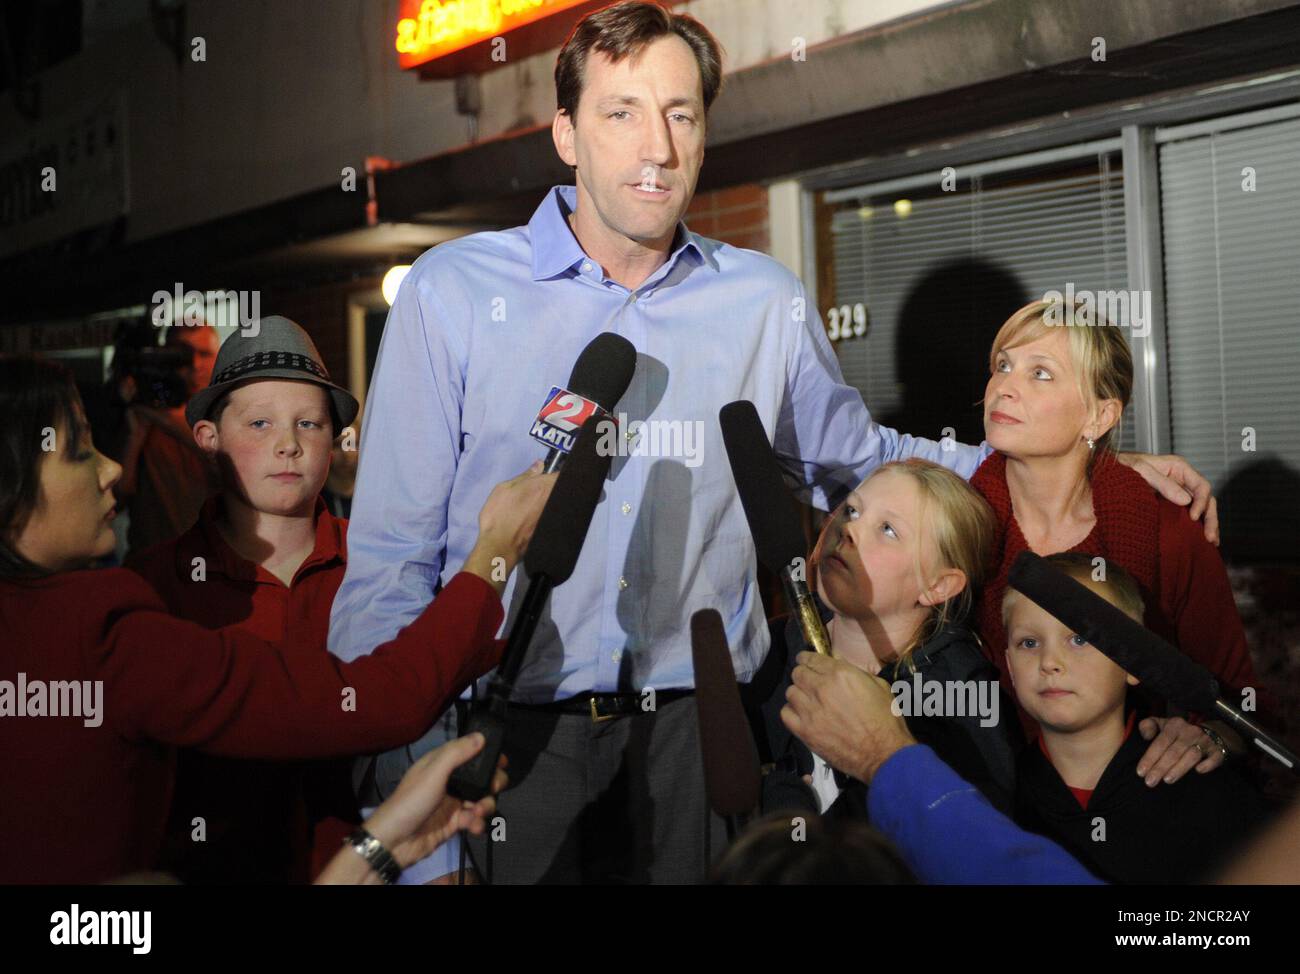 Oregon Republican gubernatorial candidate Chris Dudley, with his wife Chris  Love Dudley, right, and children from left, Charles Dudley, Emma Dudley and  Sam Dudley, concedes the victory to John Kitzhaber outside a